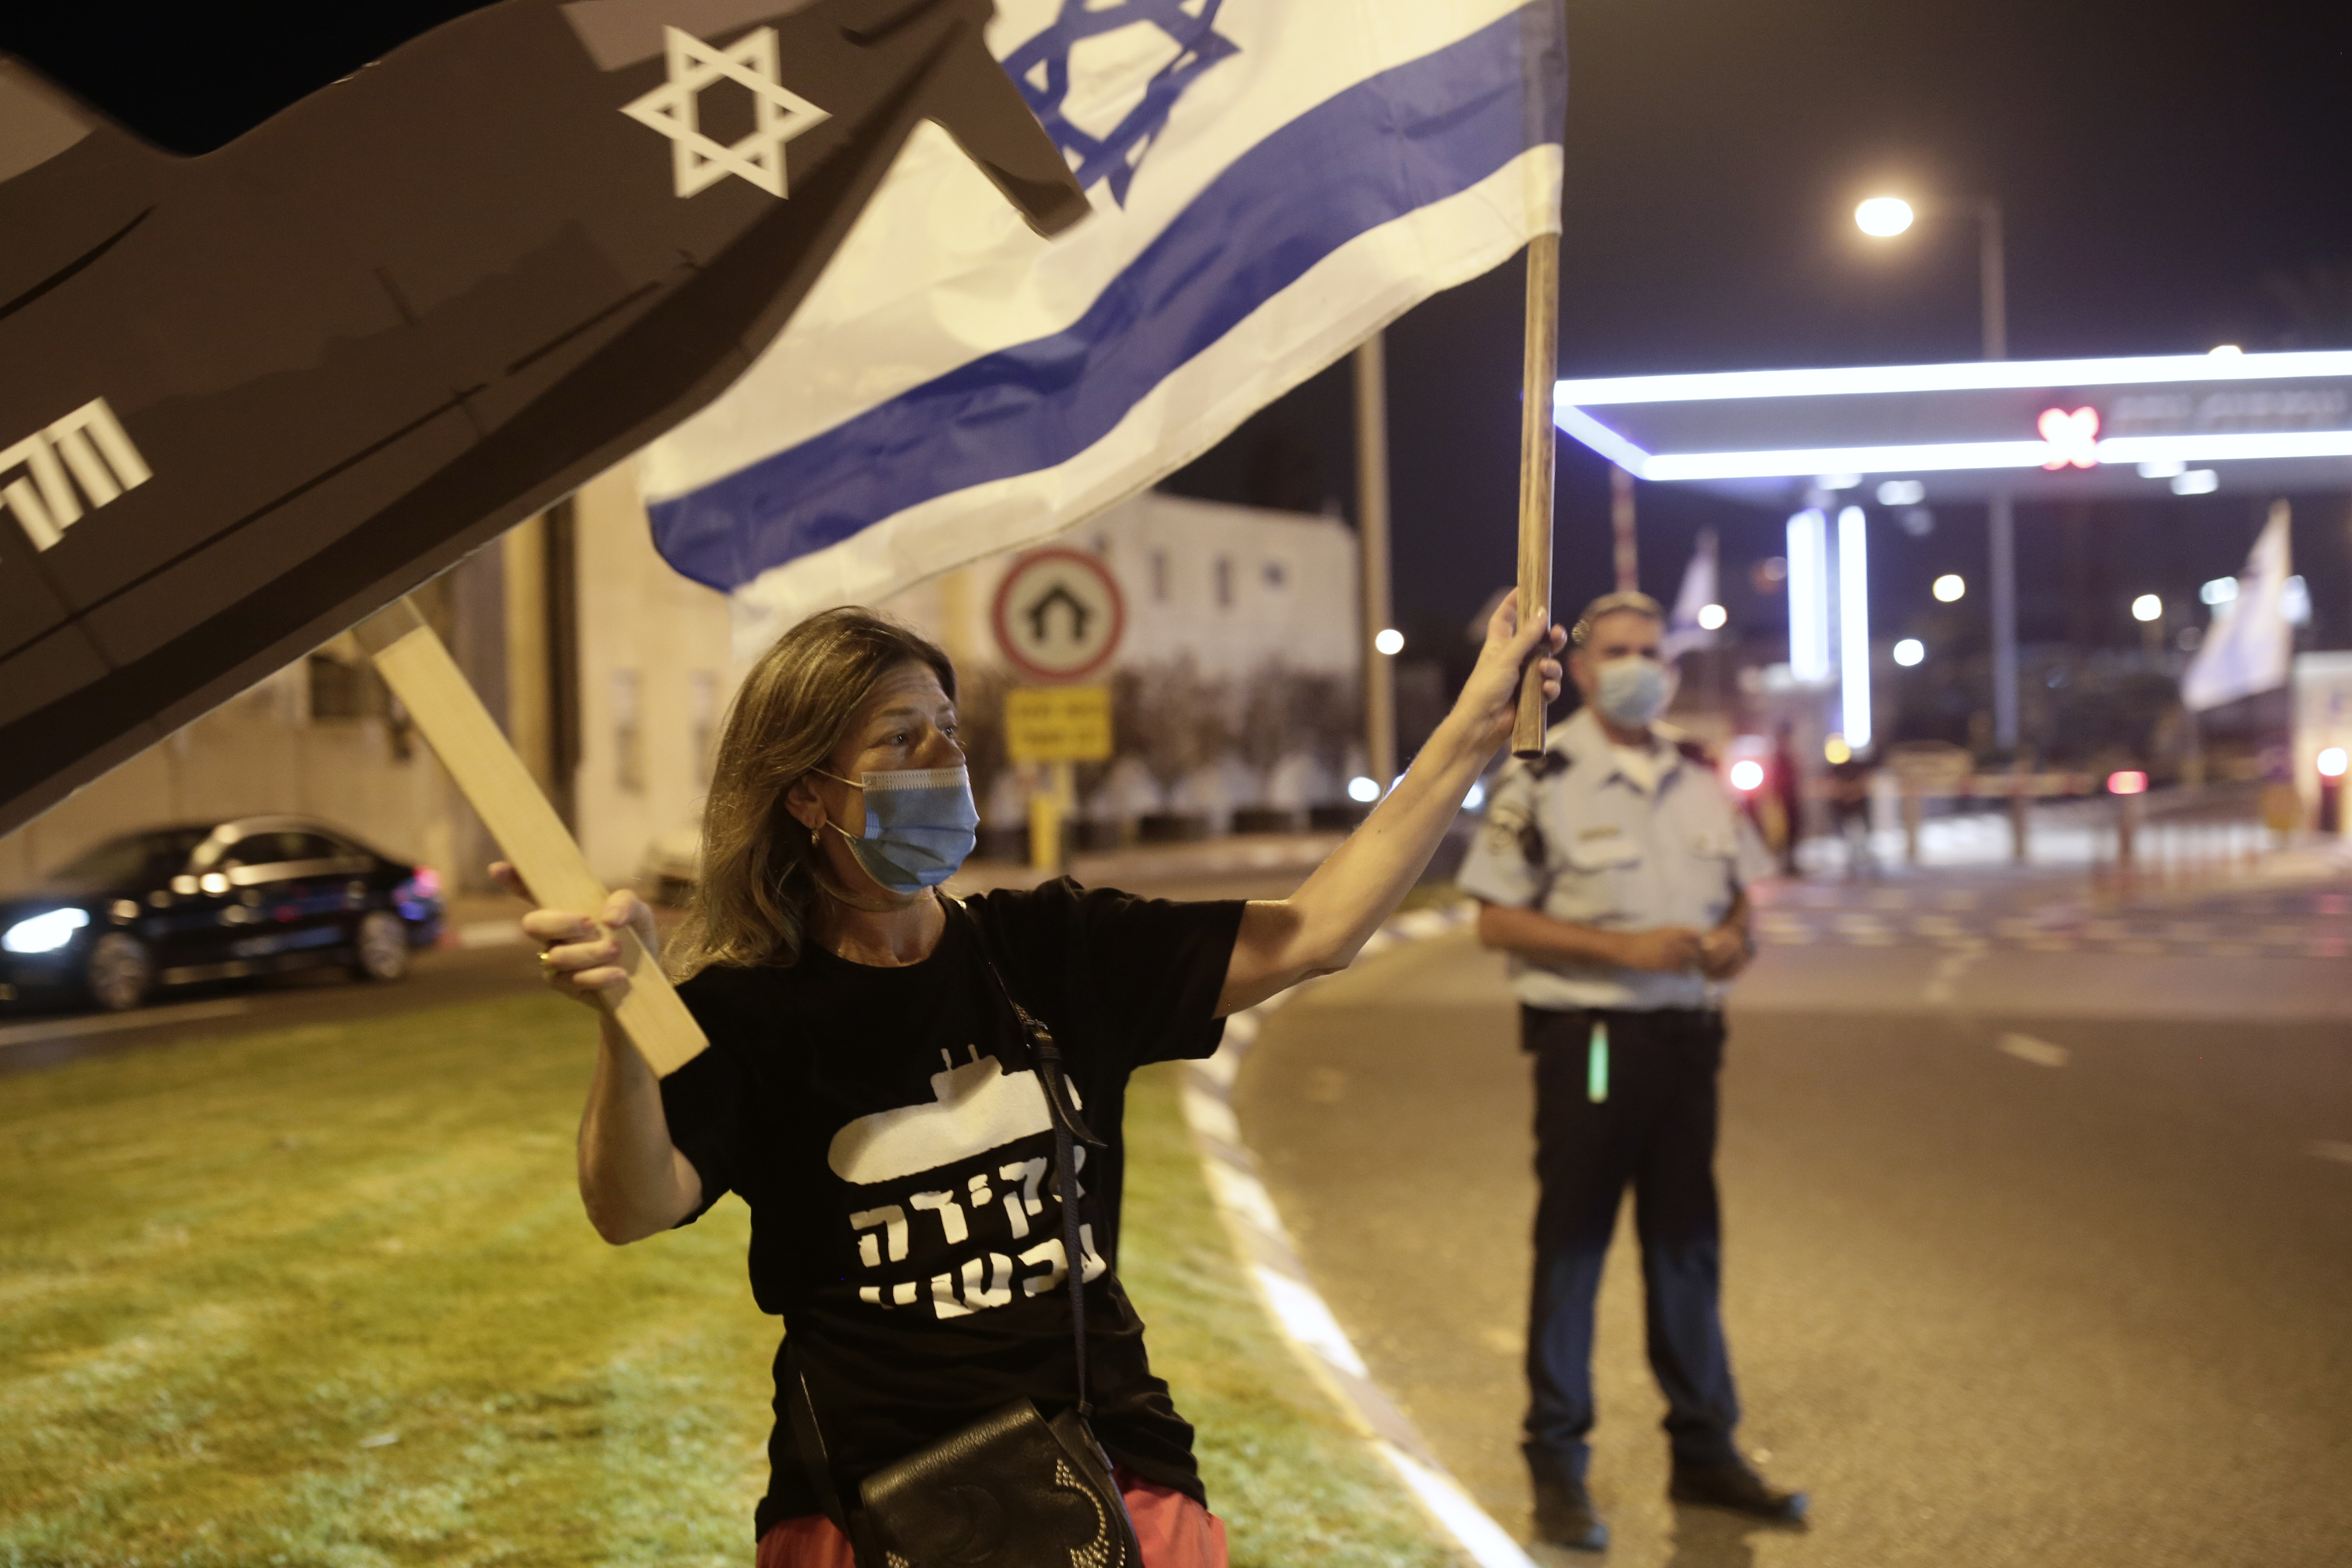 A protester waves an Israeli flag and a placard as a policeman watches a demonstration to block an entrance to Ben Gurion Airport, where Prime Minister Benjamin Netanyahu and his family were expected to fly with an Israeli delegation to the U.S. for a ceremony with the United Arab Emirates, in Tel Aviv, Sunday, Sept. 13, 2020. (AP Photo/Maya Alleruzzo)